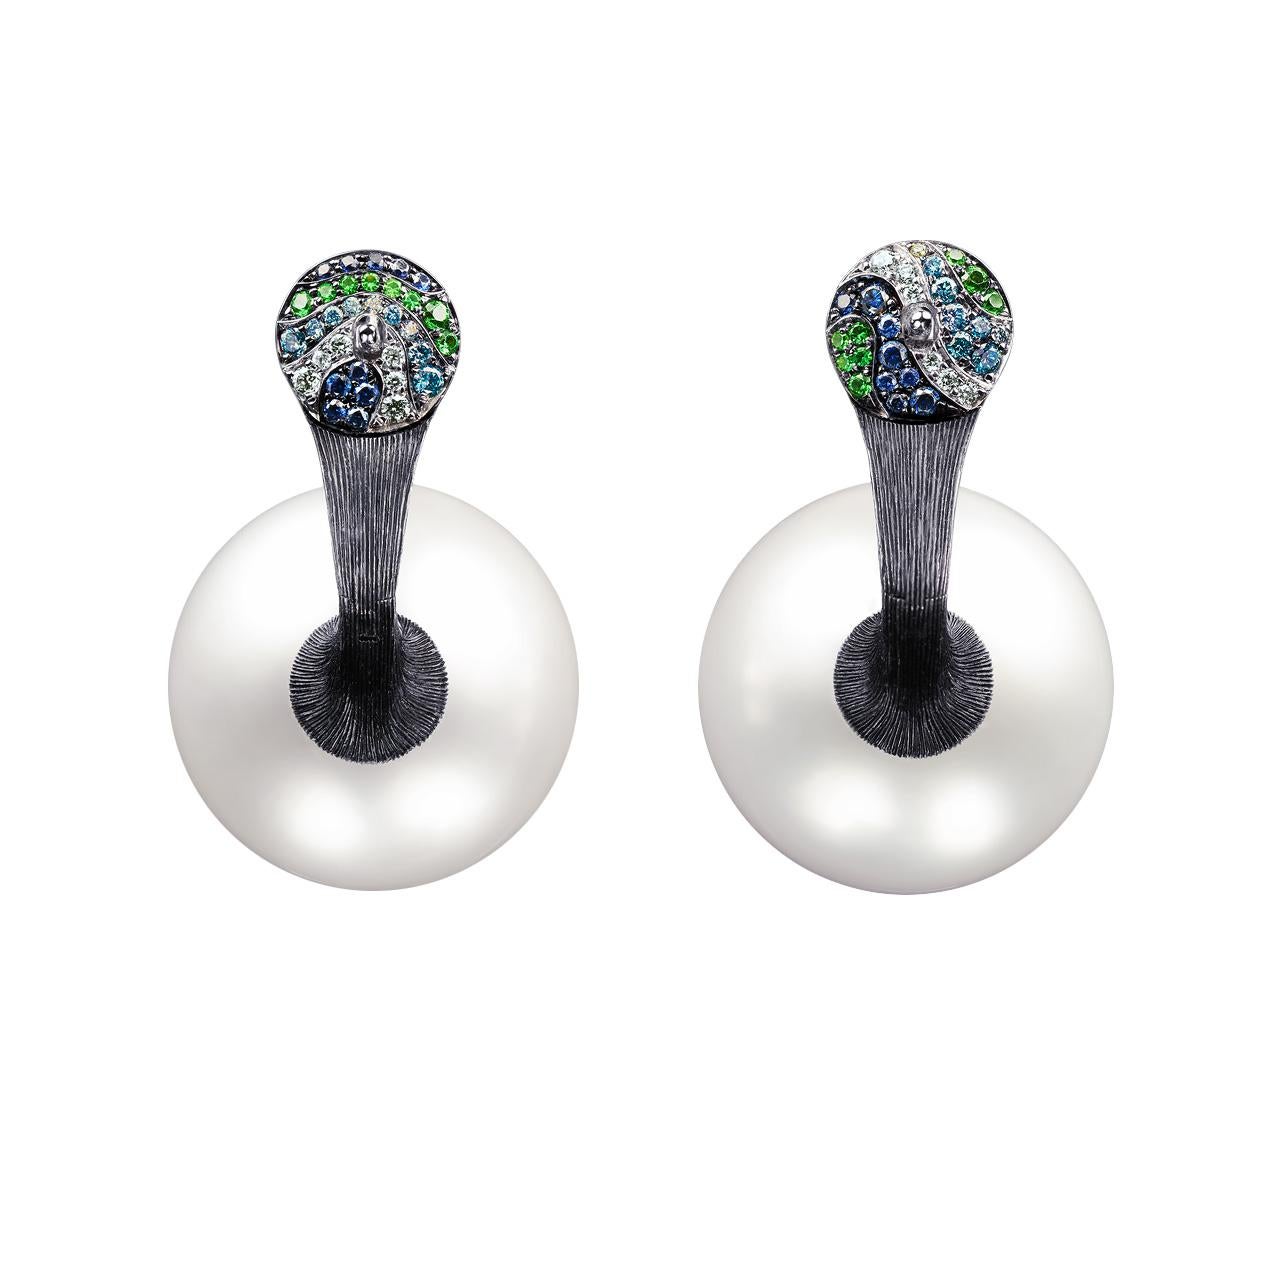 - 12 Round Diamonds – 0.06 ct, D-F/VVS
- 17 Round Blue Diamonds – 0.10 ct
- 18 Round Sapphires– 0.12 ct
- 15 Round Tsavorites– 0.08 ct
- 2 White South Sea pearls - 19.7 mm
- 18K White Gold 
- Weight: 27.01 g
Two perfectly matched lustrous White